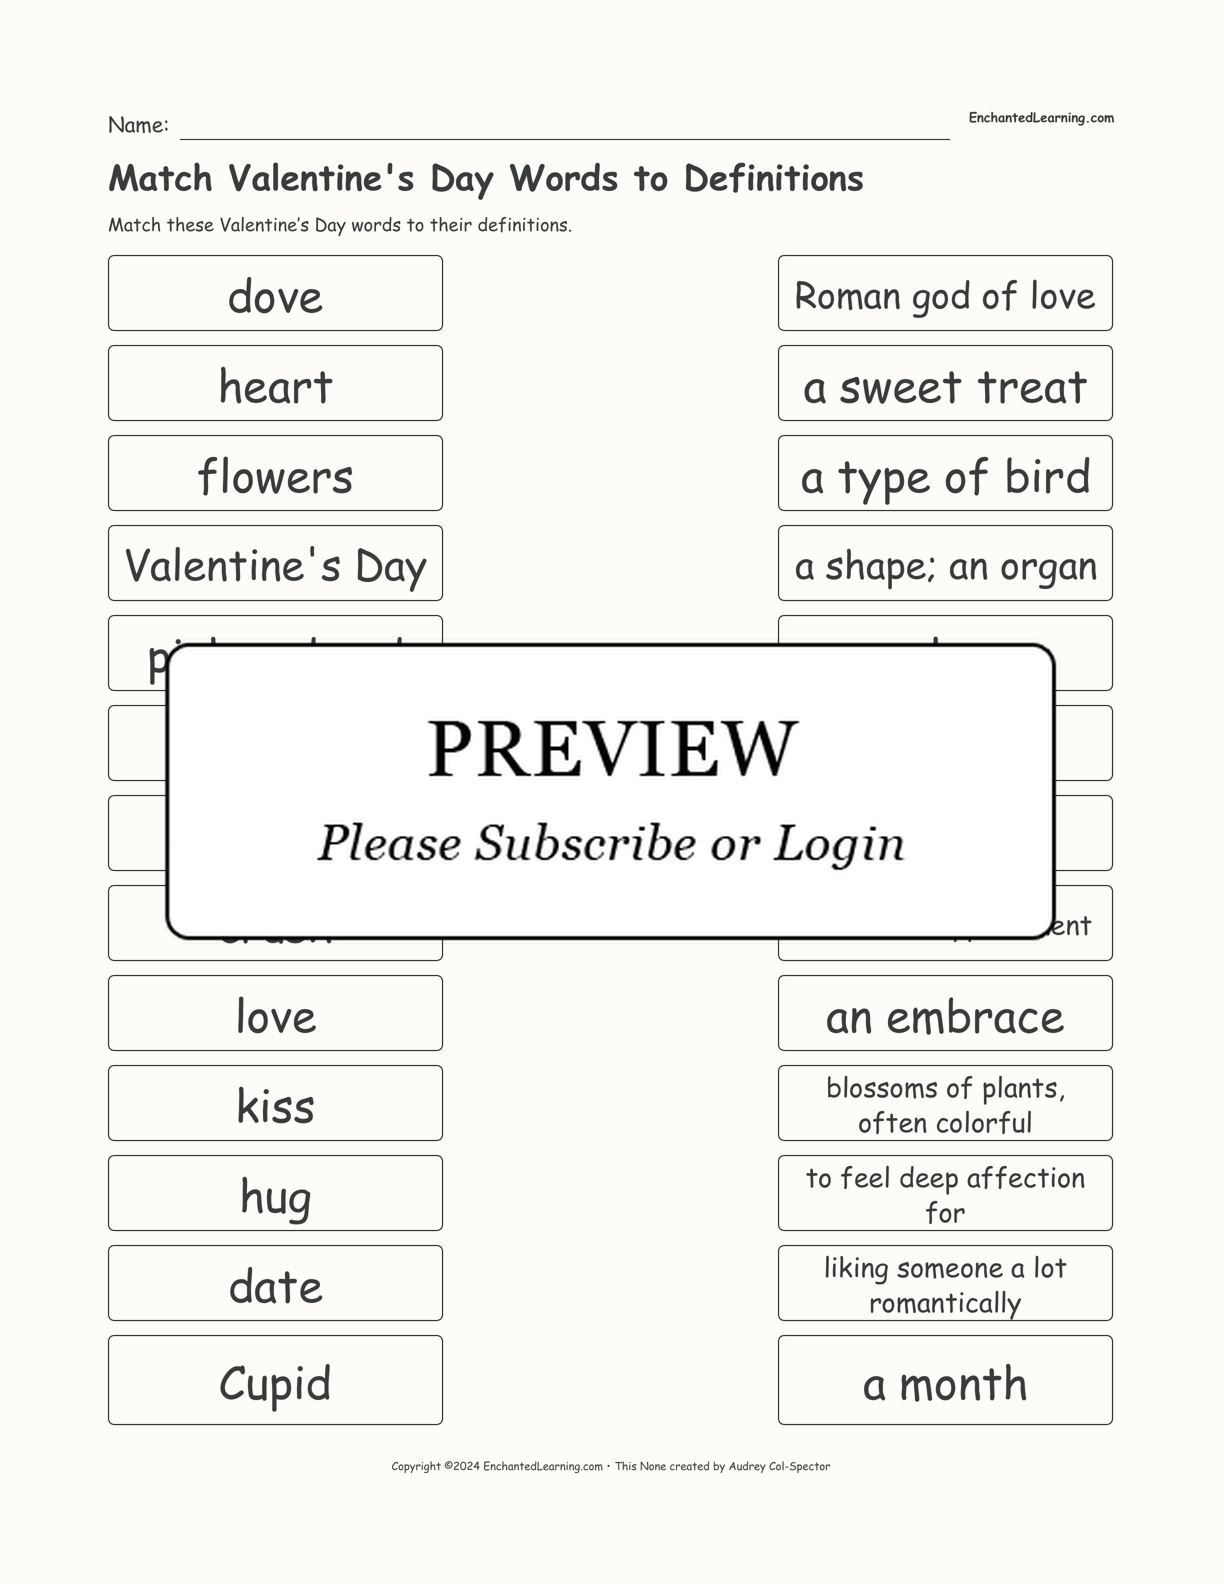 Match Valentine's Day Words to Definitions interactive worksheet page 1